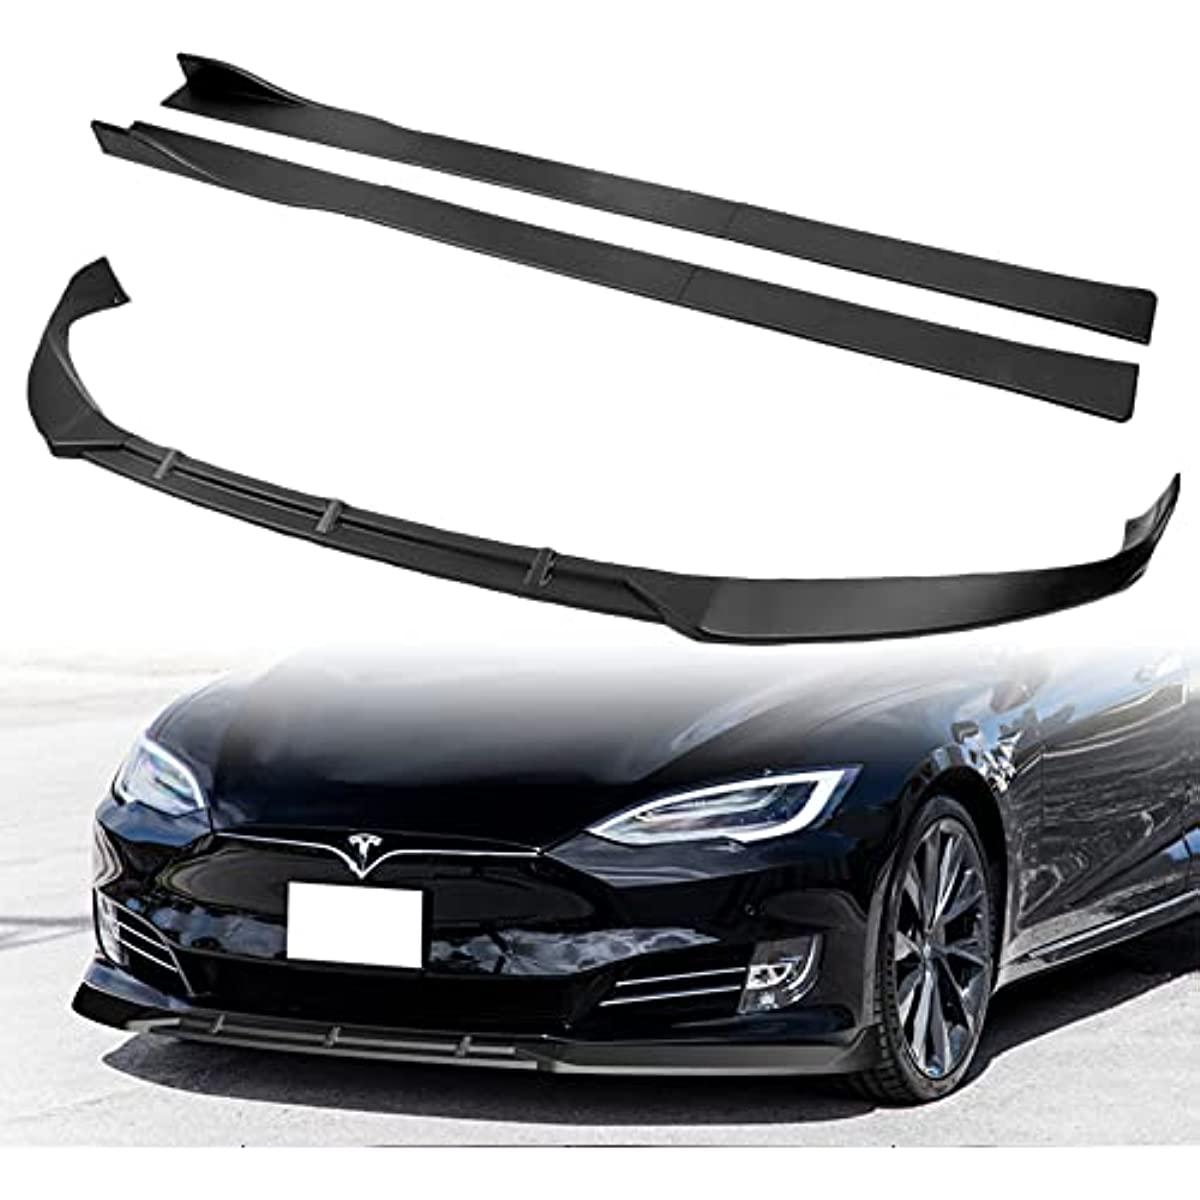 Front Body Kit Lip & Side Skirt Extensions Diffuser Set Compatible with 2016 2017 2018 2019 2020 Tesla Model S